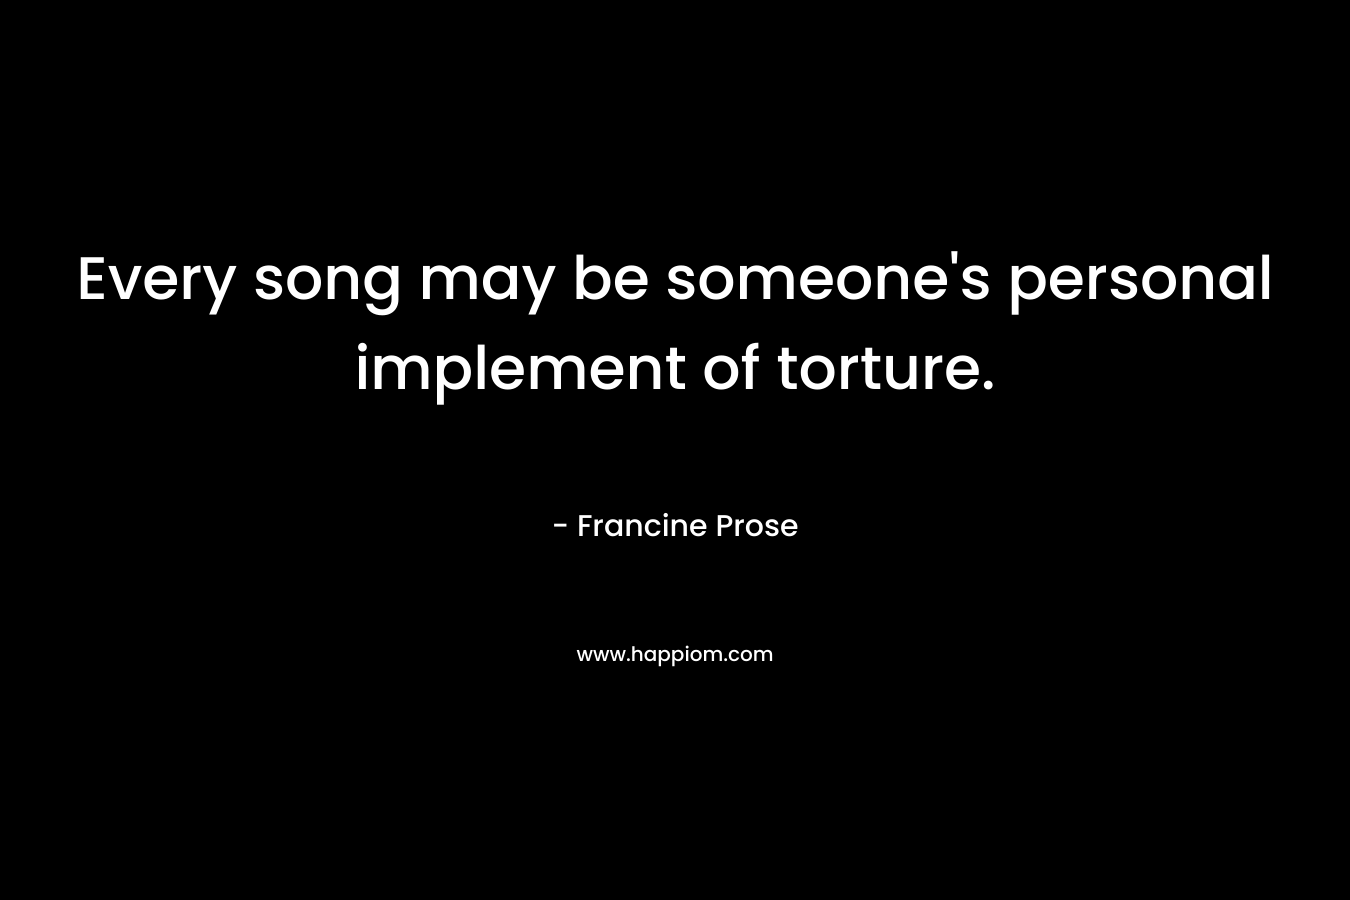 Every song may be someone’s personal implement of torture. – Francine Prose